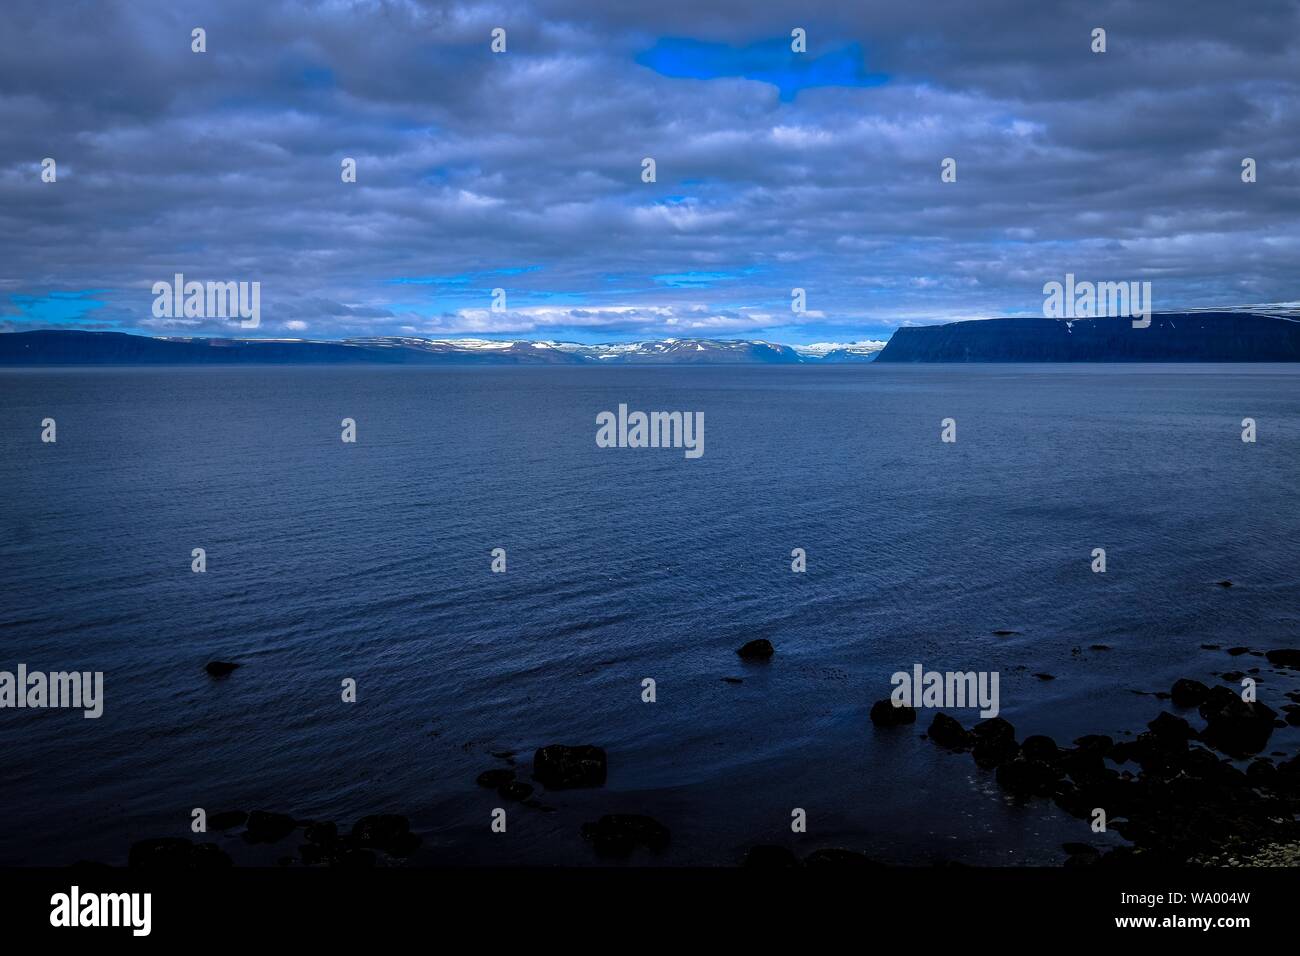 Beautiful shot of a sea and mountains in the distance under a cloudy sky Stock Photo